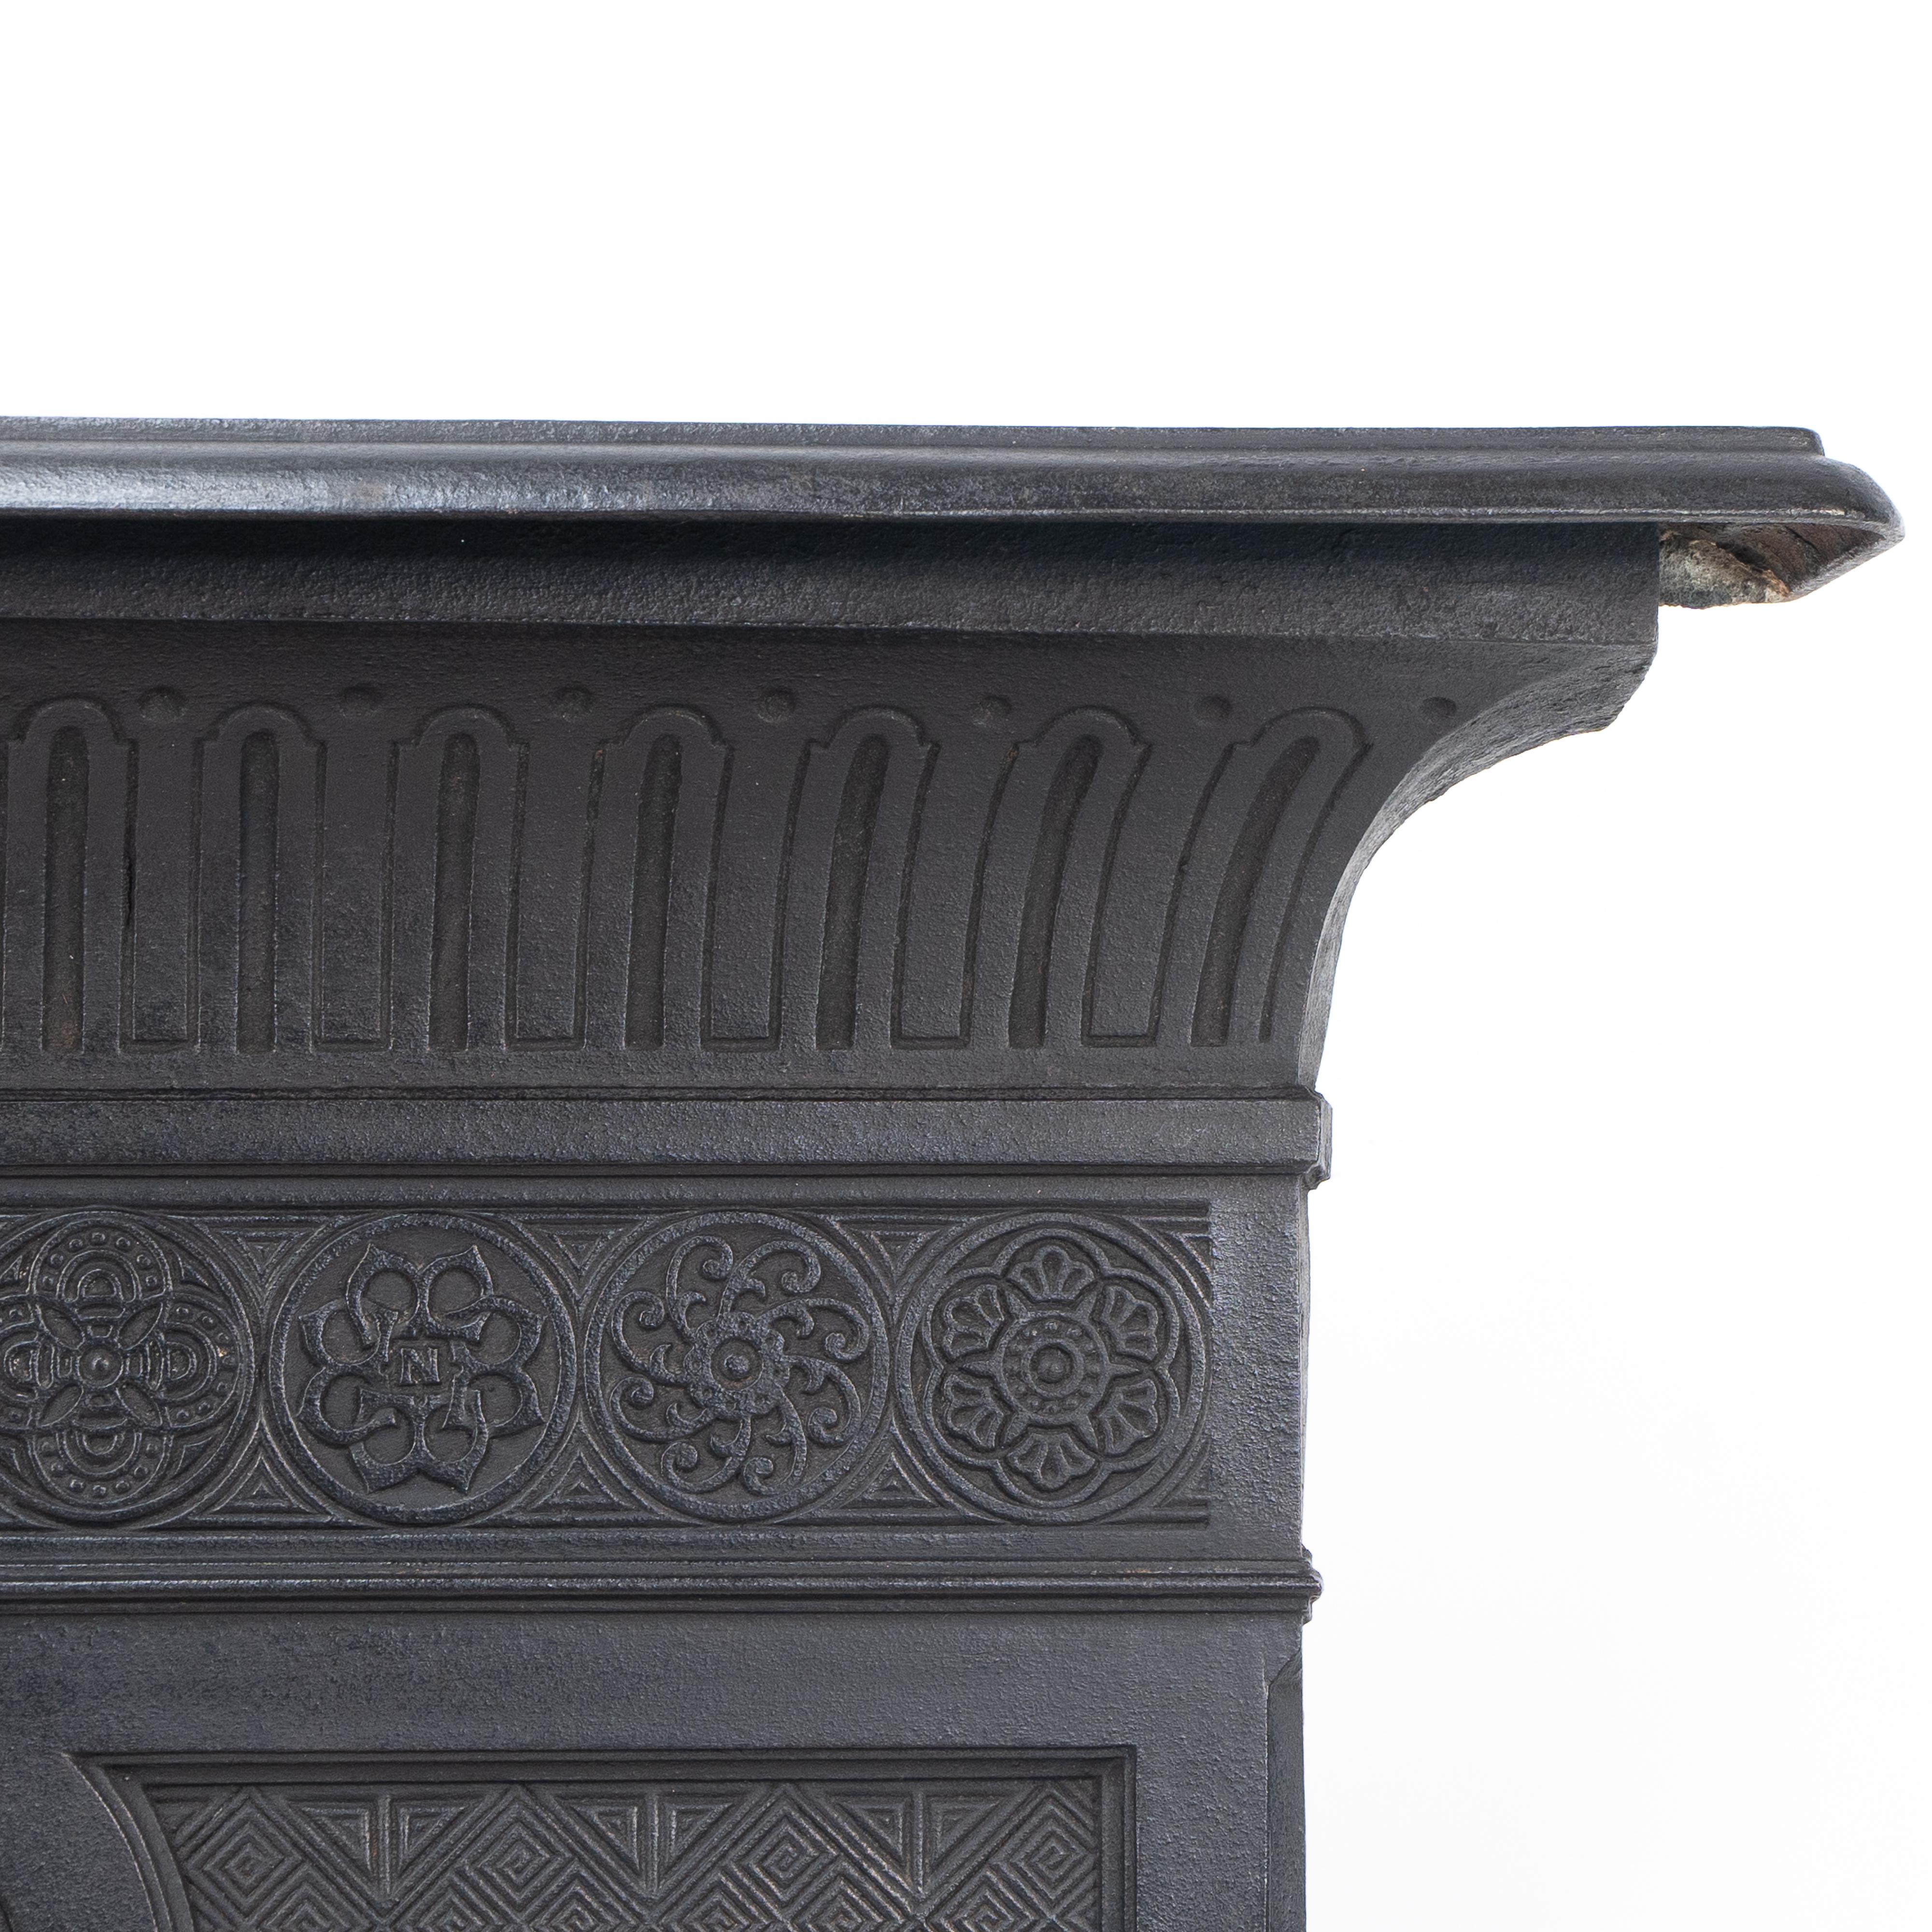 Thomas Jeckyll for Barnard Bishop & Barnard. A rare Aesthetic Movement fireplace In Good Condition For Sale In London, GB